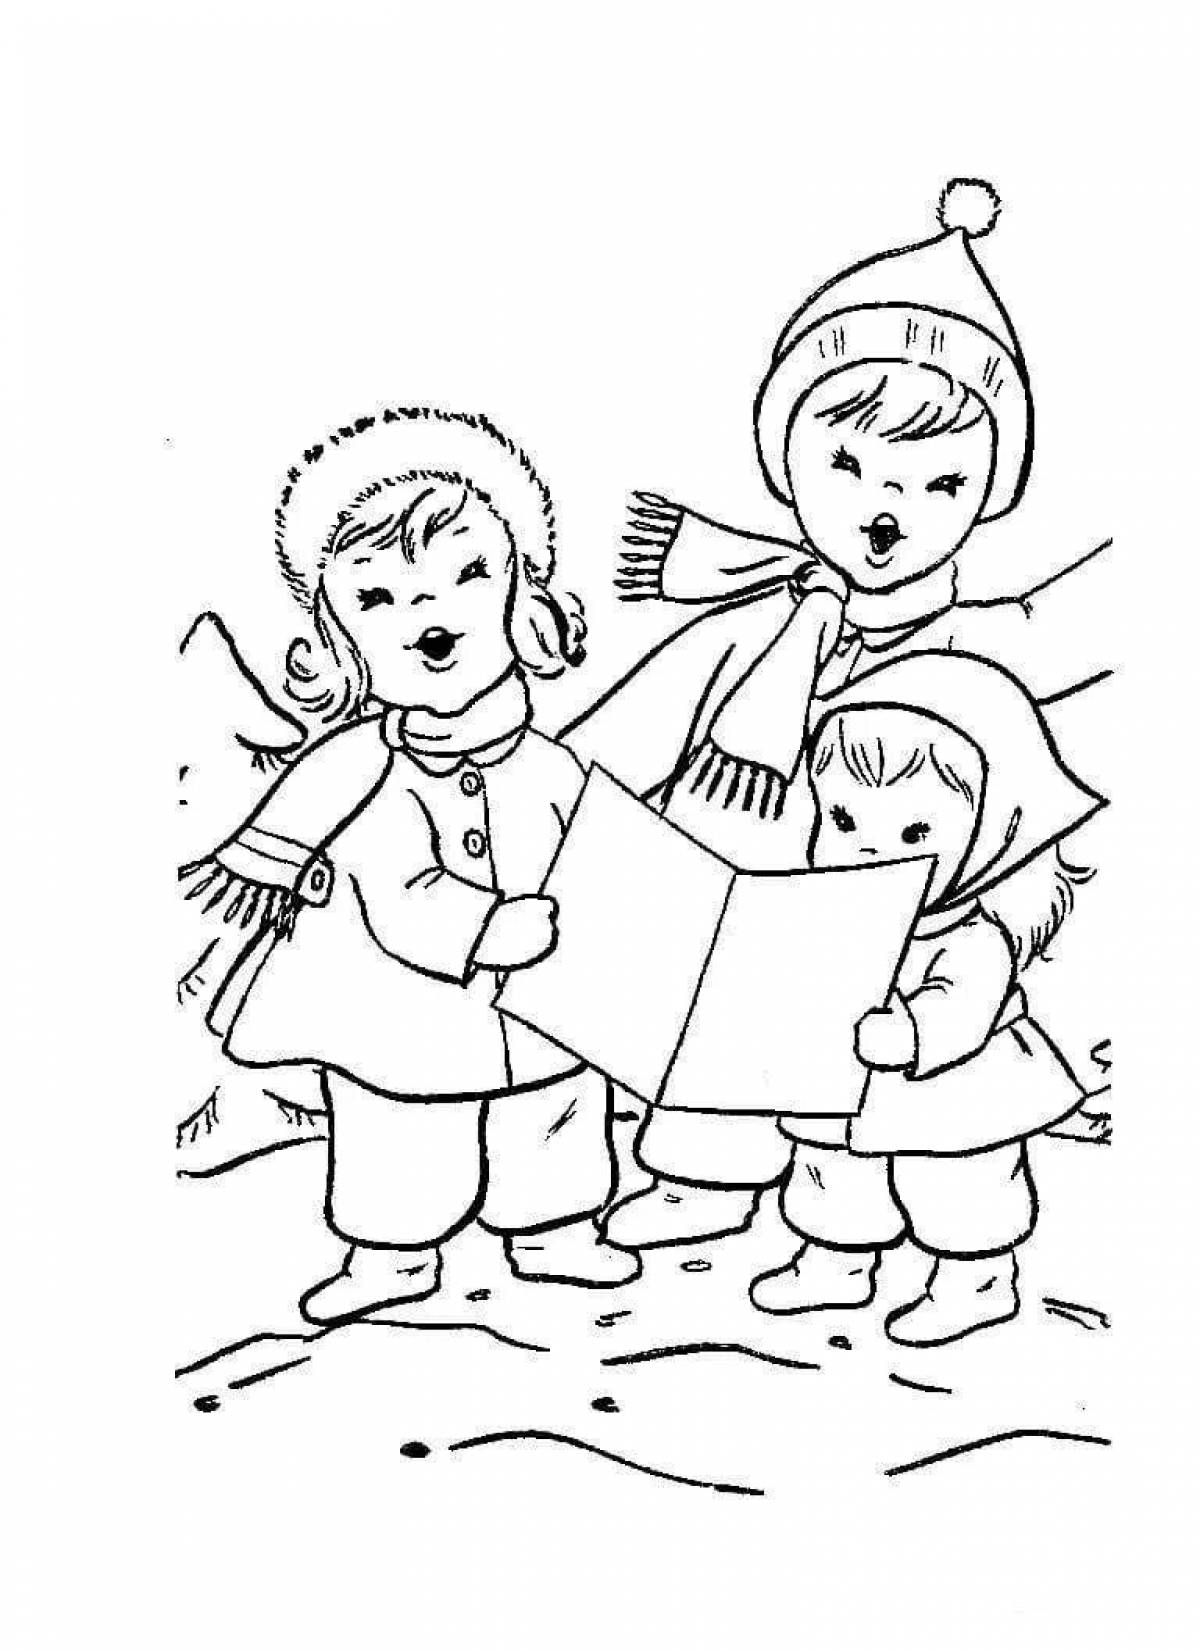 Exciting Christmas carol coloring pages for kids